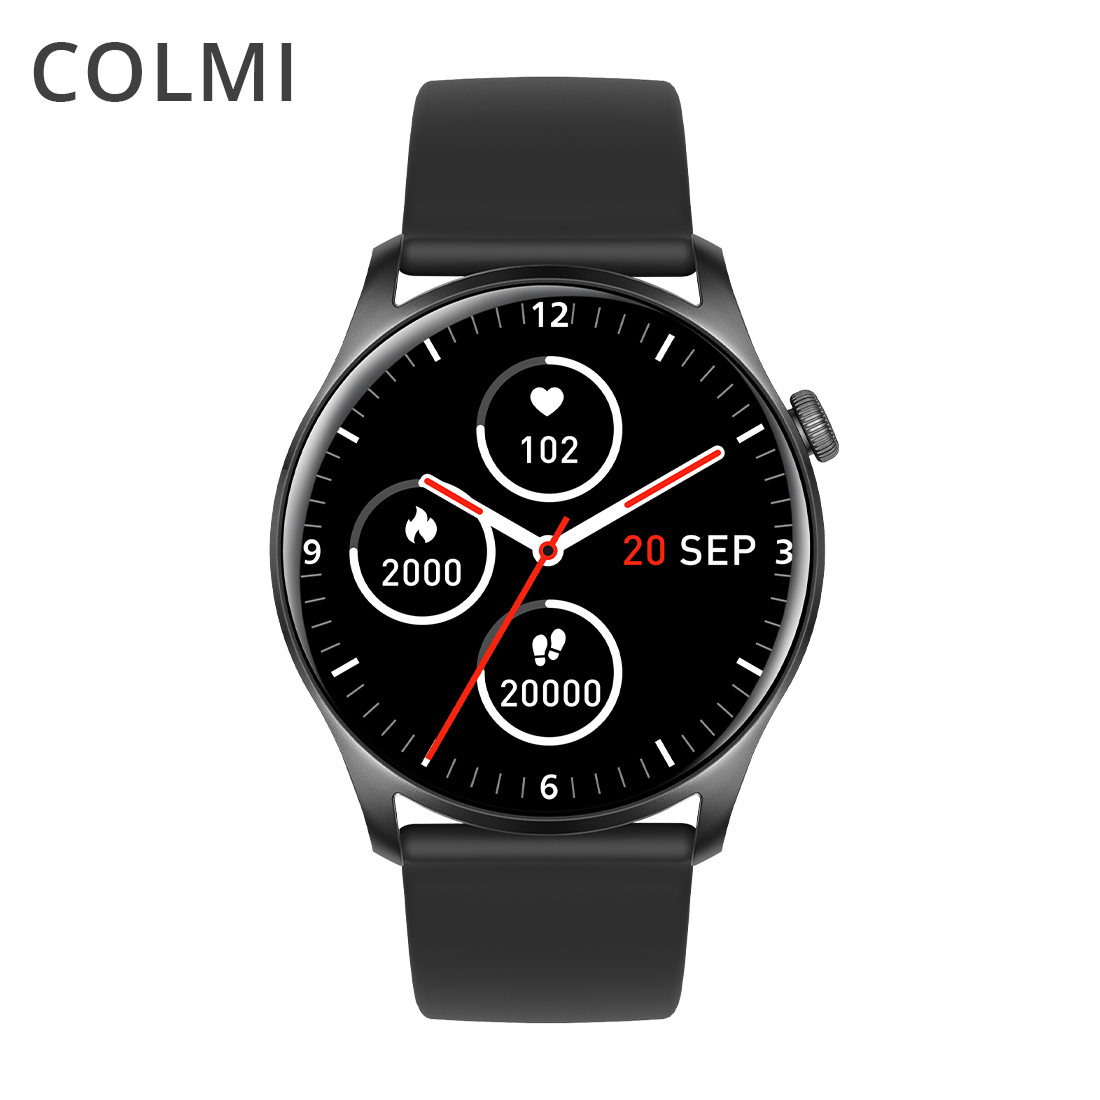 Best Price for Smart Watches New Arrivals 2020 - COLMI SKY 8 Smart Watch Women IP67 Waterproof Bluetooth Smartwatch Men For Android iOS Phone – Colmi